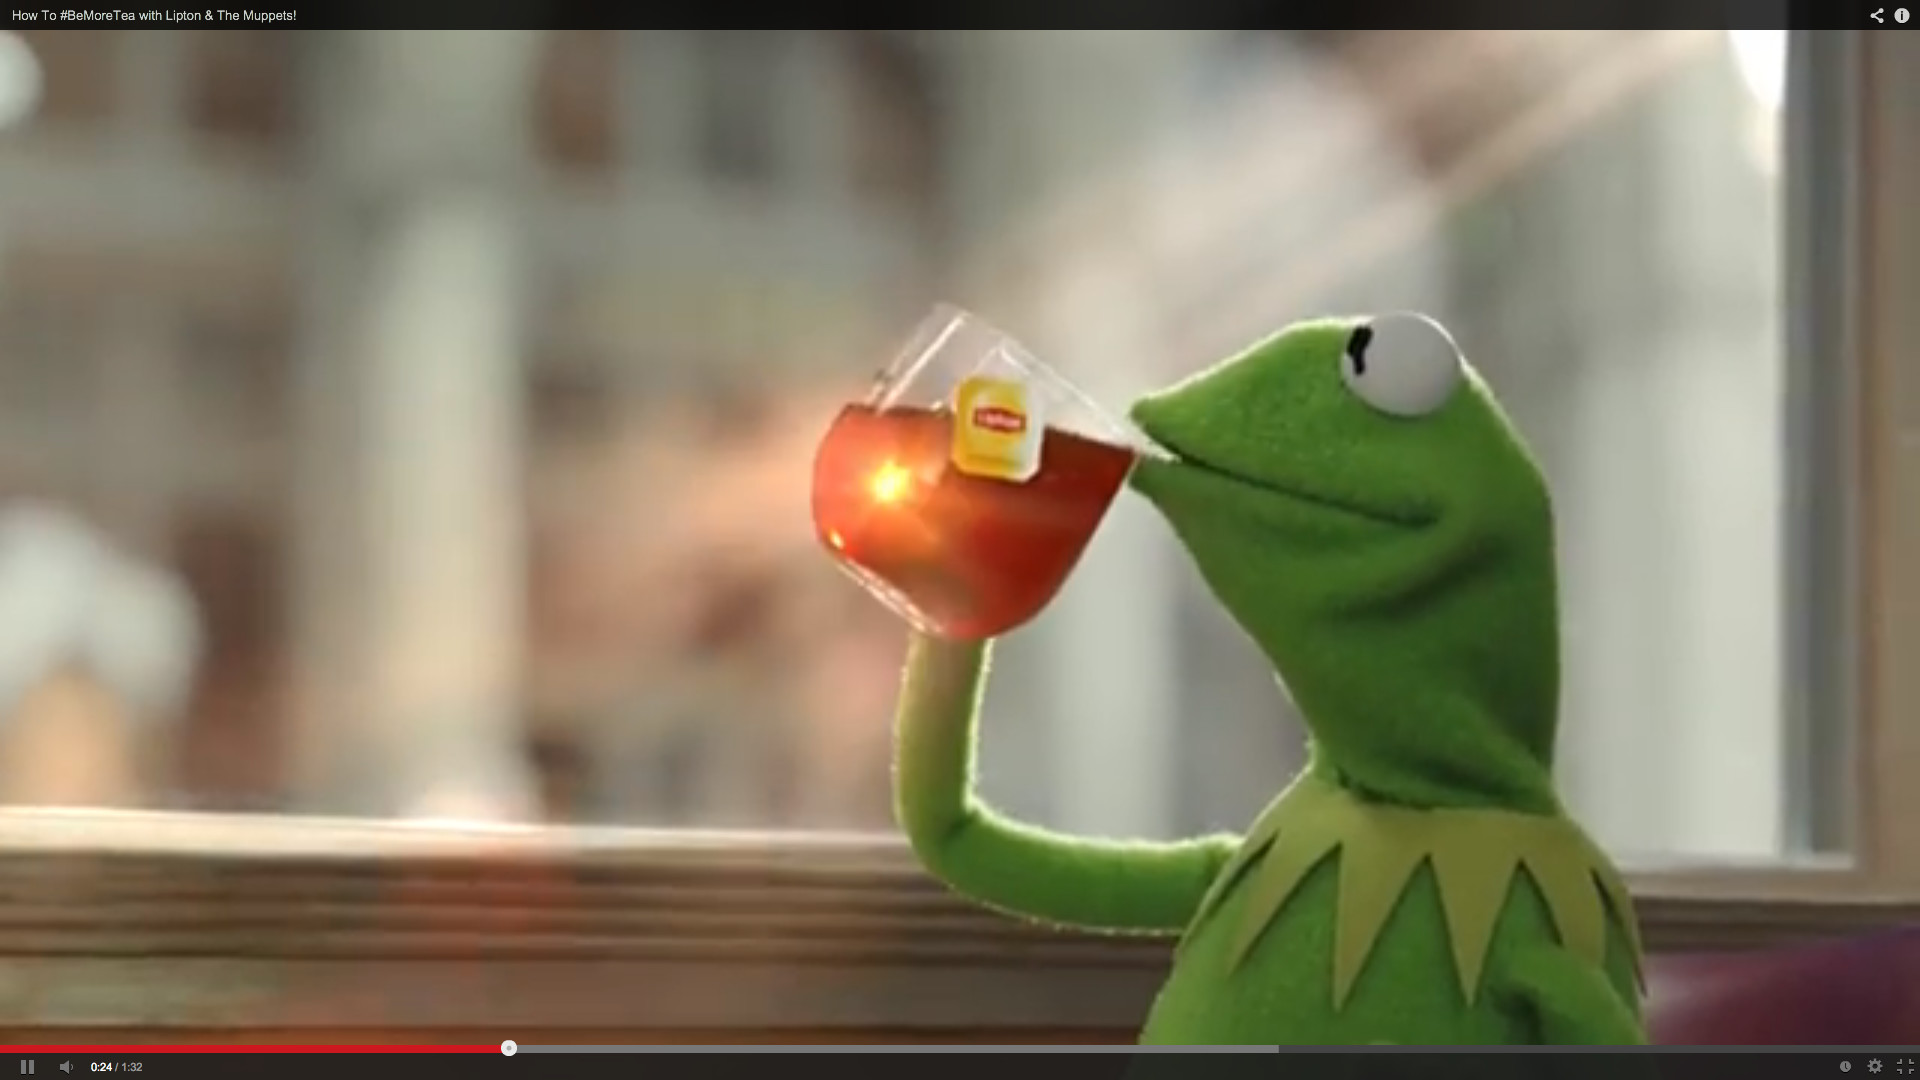 Kermit the Frog casually sipping on some tea